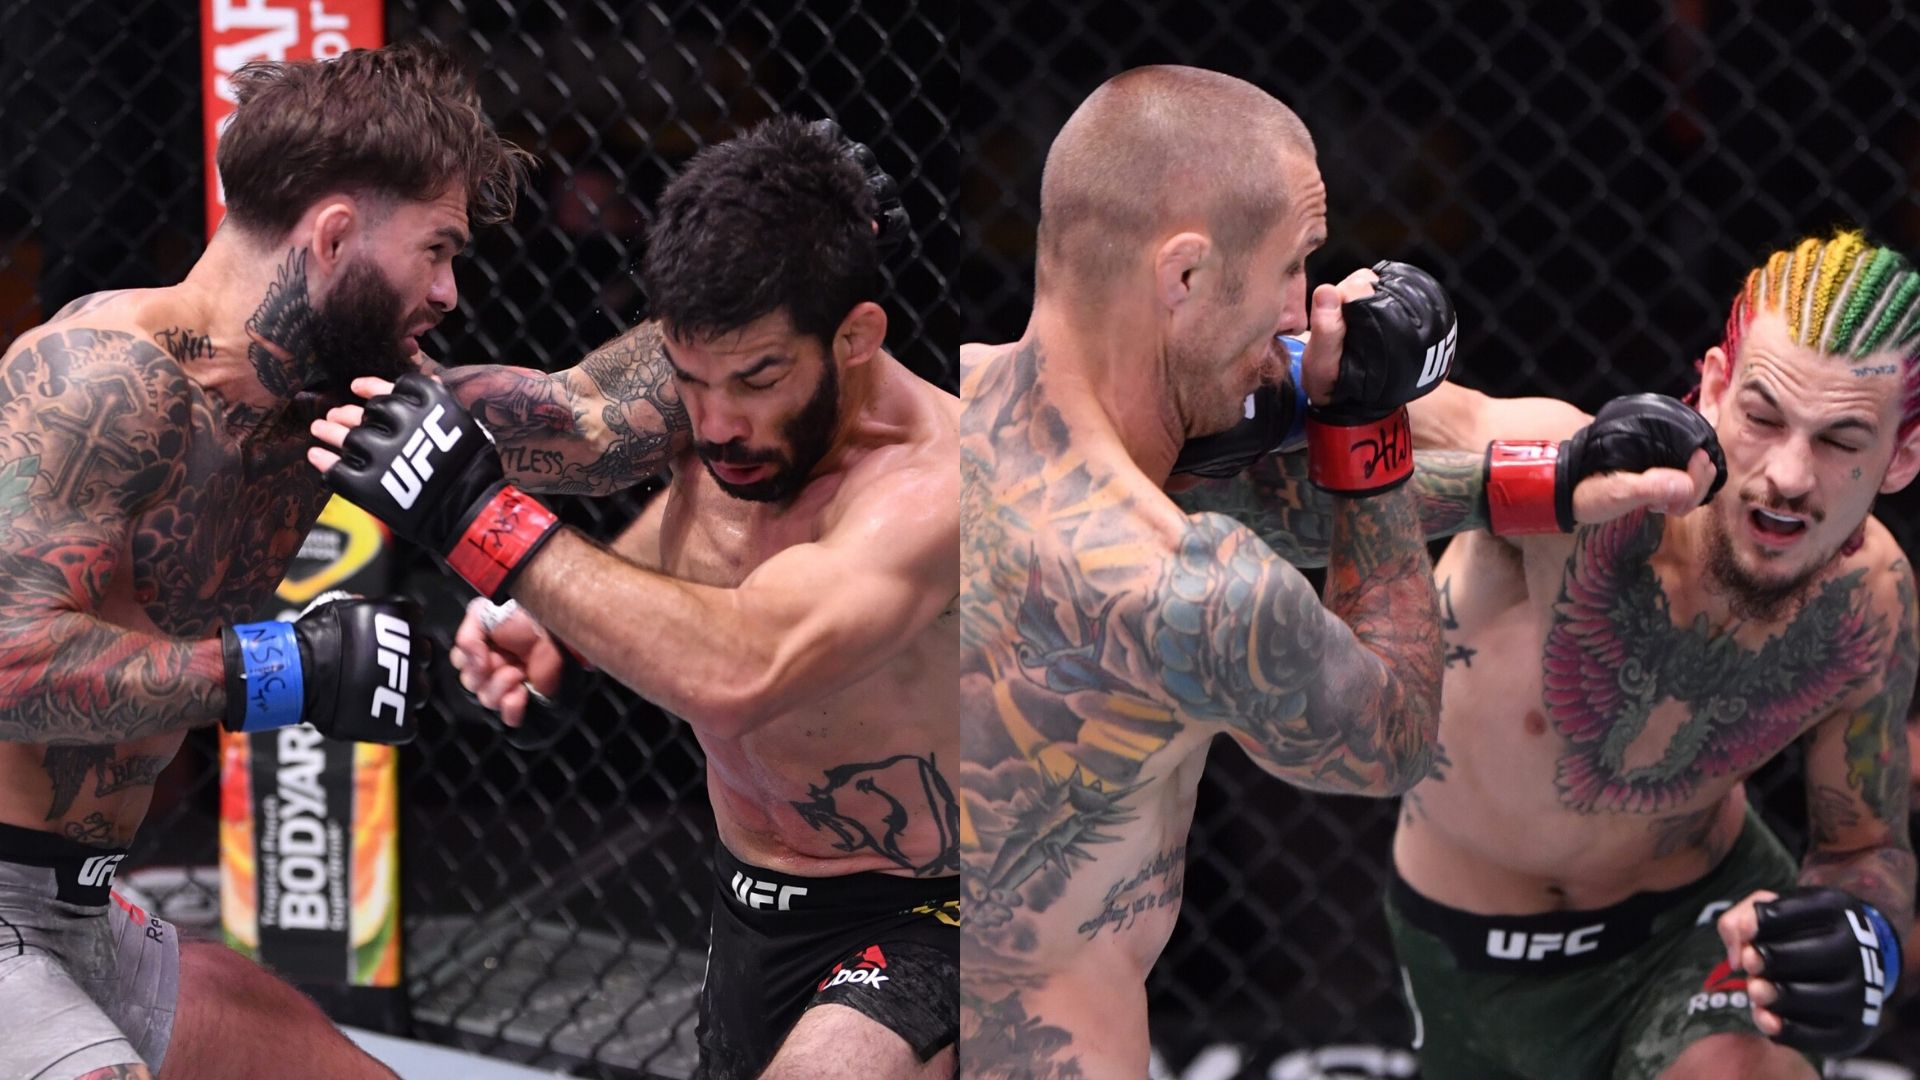 Sean O'Malley and Cody Garbrandt had two great knockouts at UFC 250